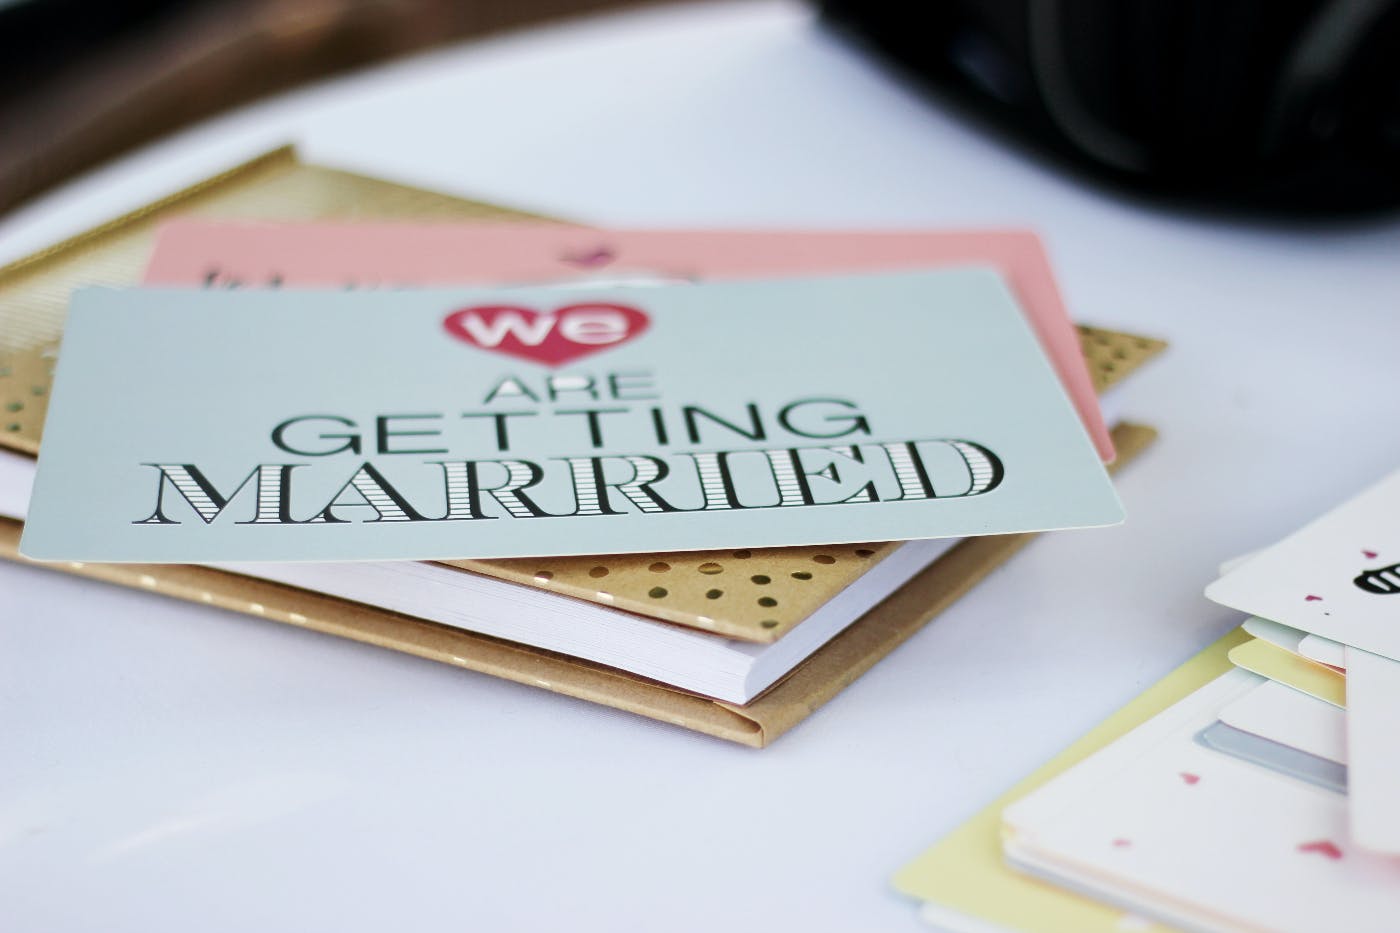 A wedding invitation with We are getting married on it